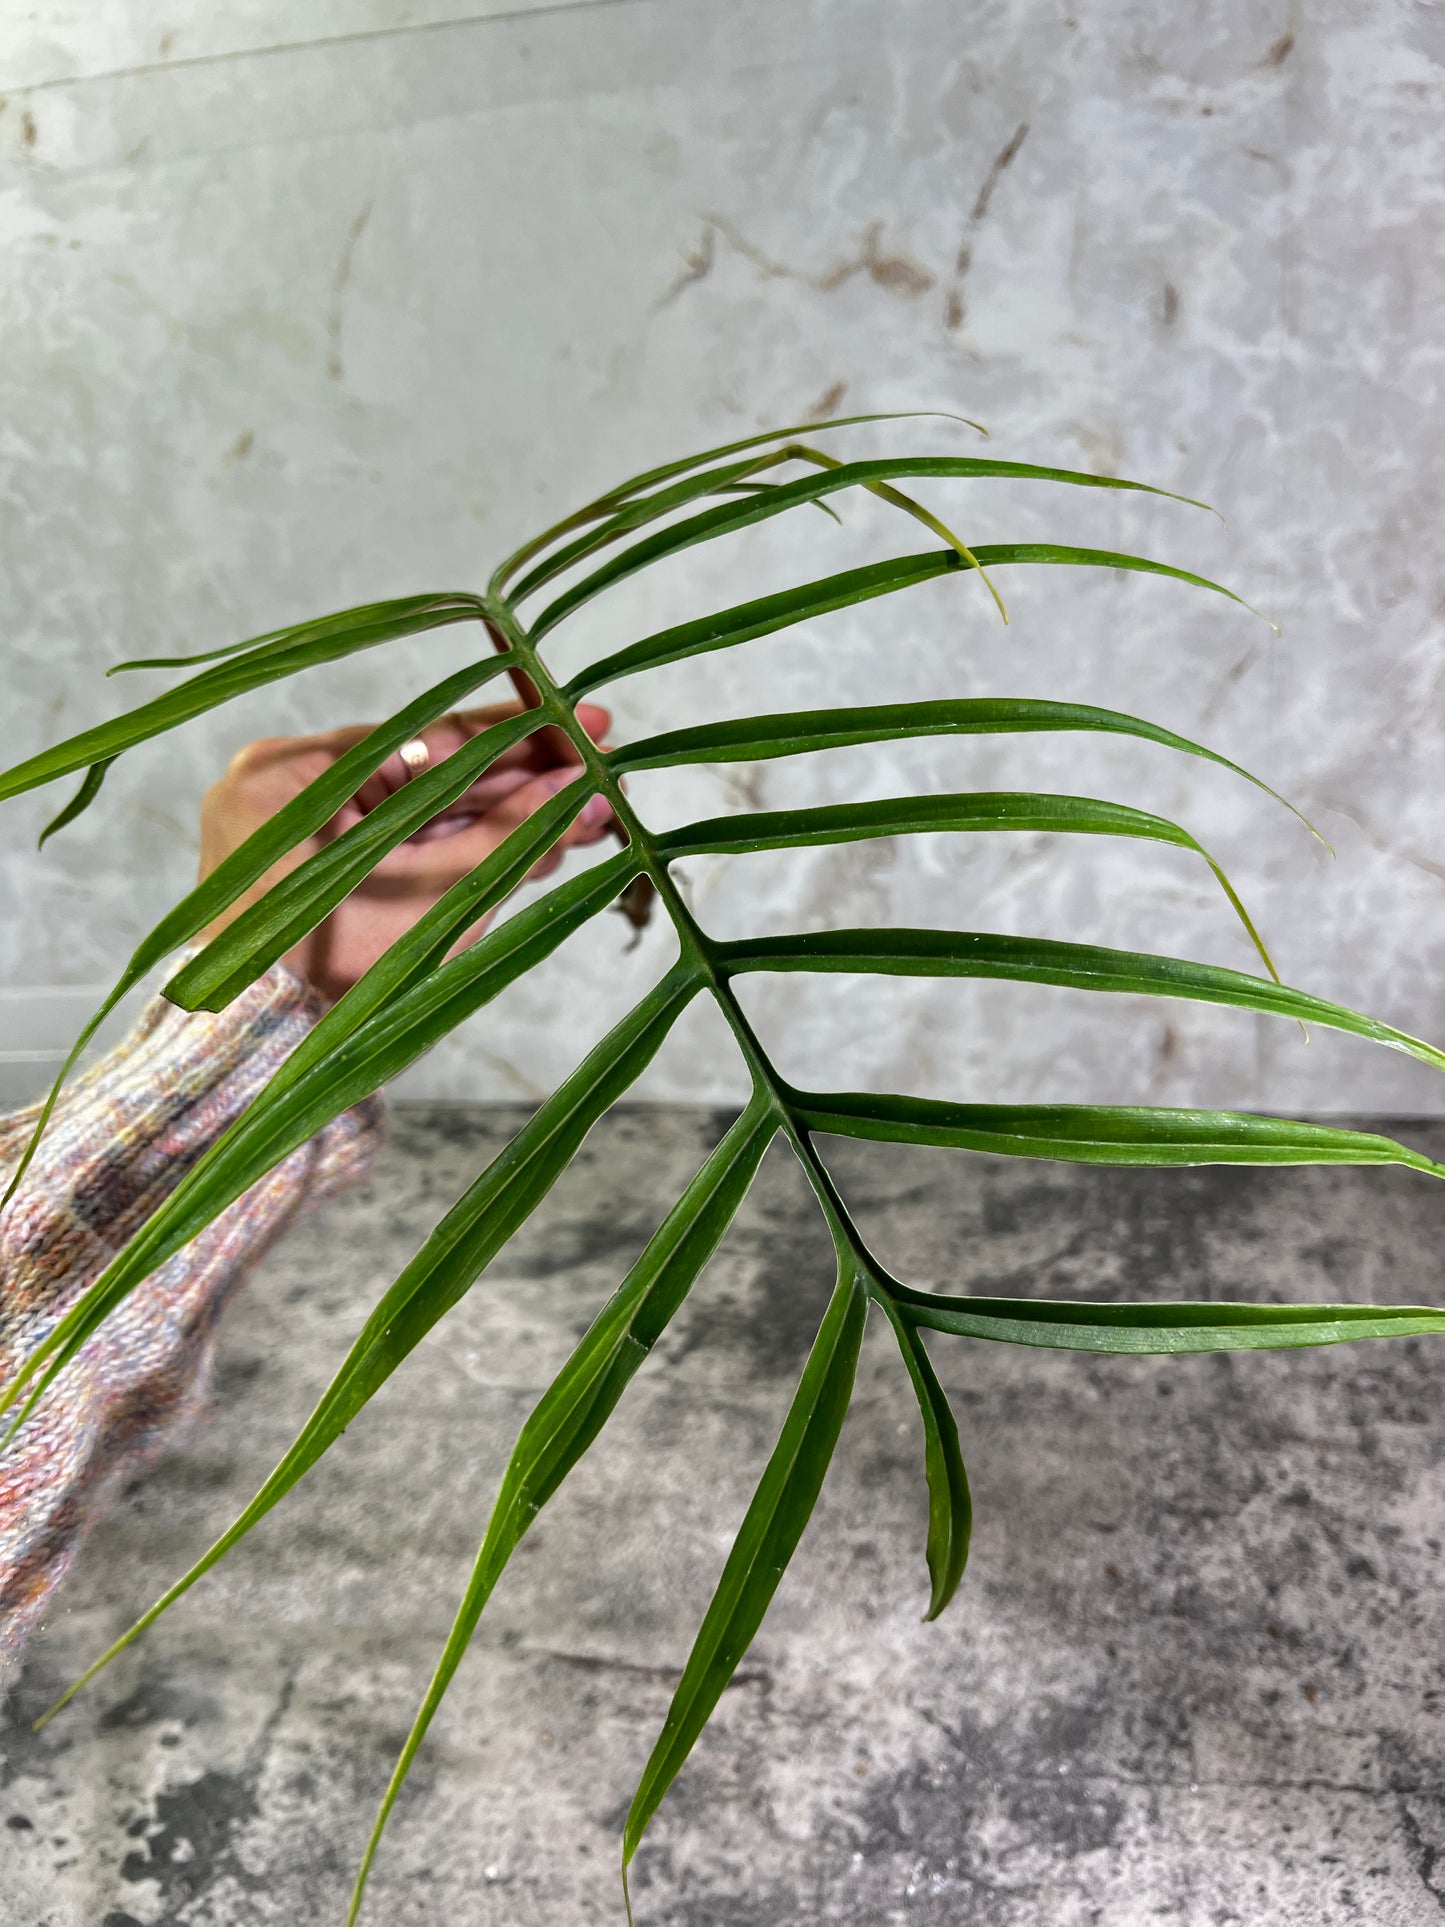 Philodendron Tortum rooting cutting 1 leaf 12” long